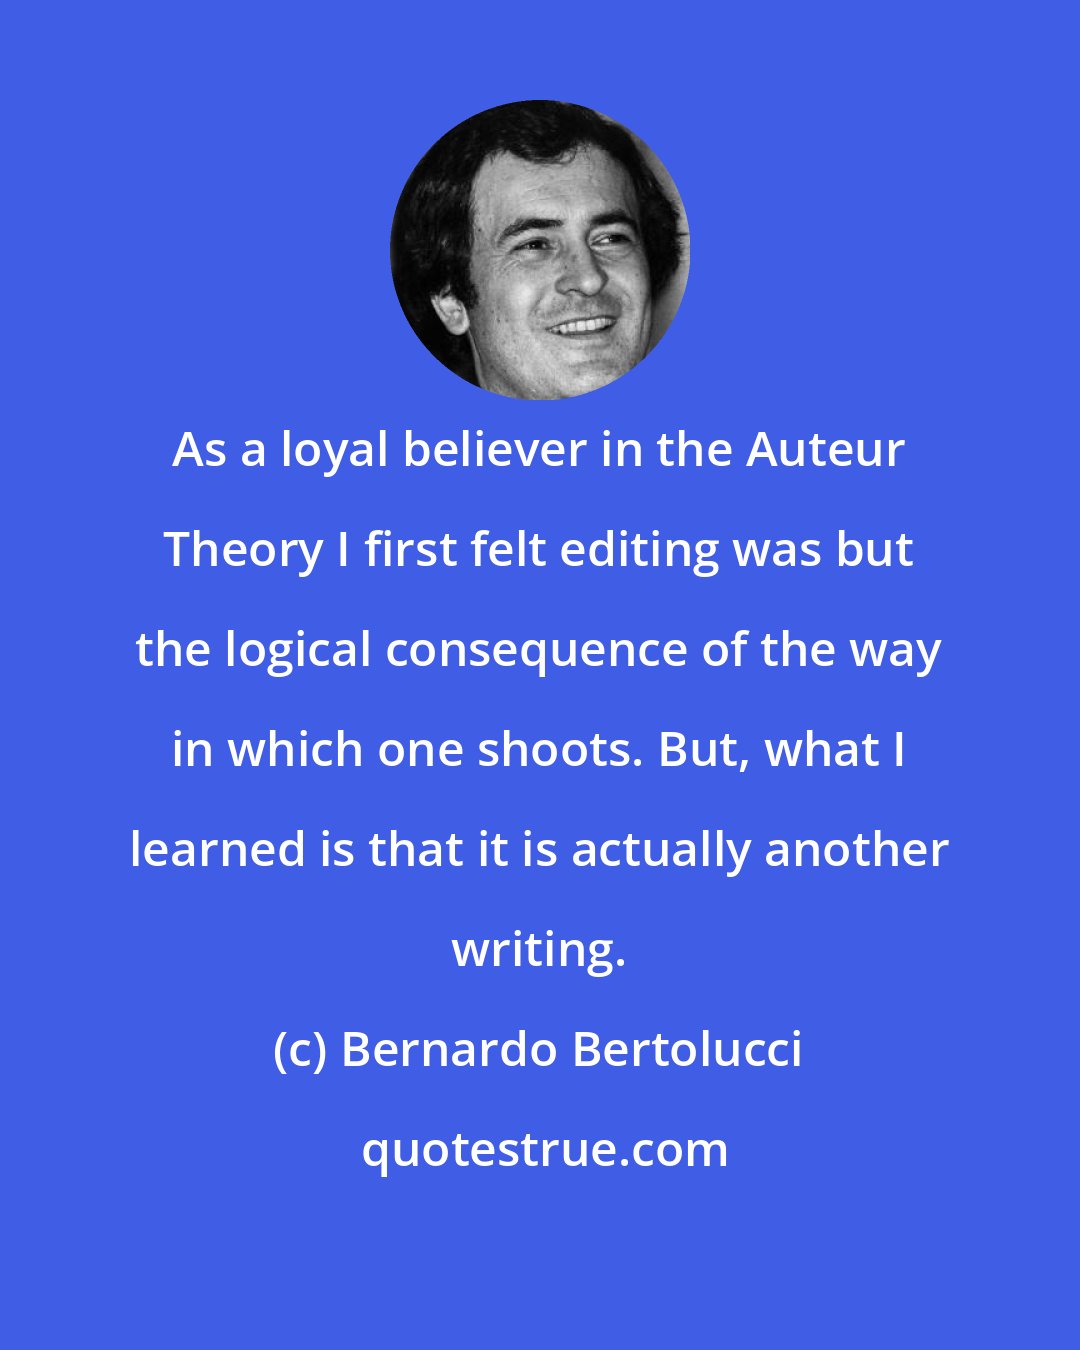 Bernardo Bertolucci: As a loyal believer in the Auteur Theory I first felt editing was but the logical consequence of the way in which one shoots. But, what I learned is that it is actually another writing.